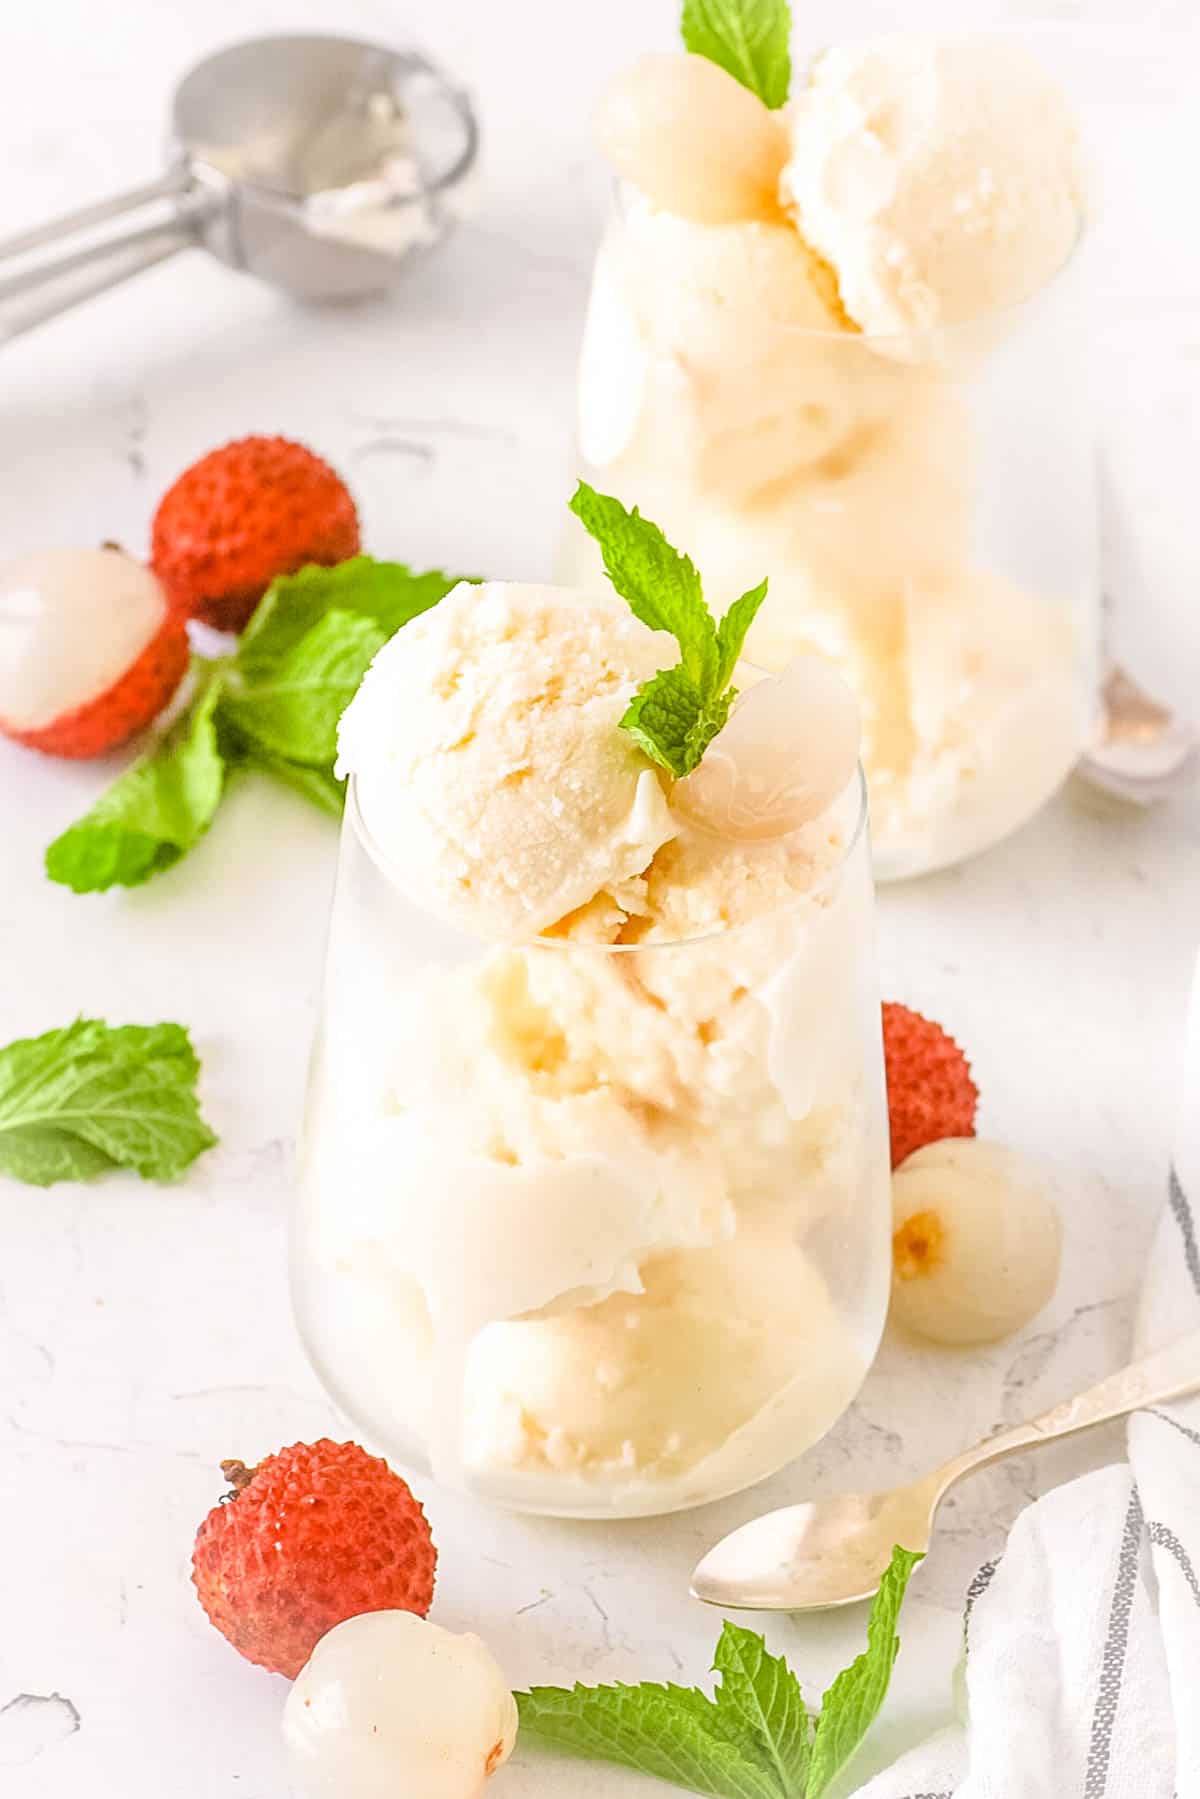 Creamy lychee ice cream served in a glass with a mint garnish.